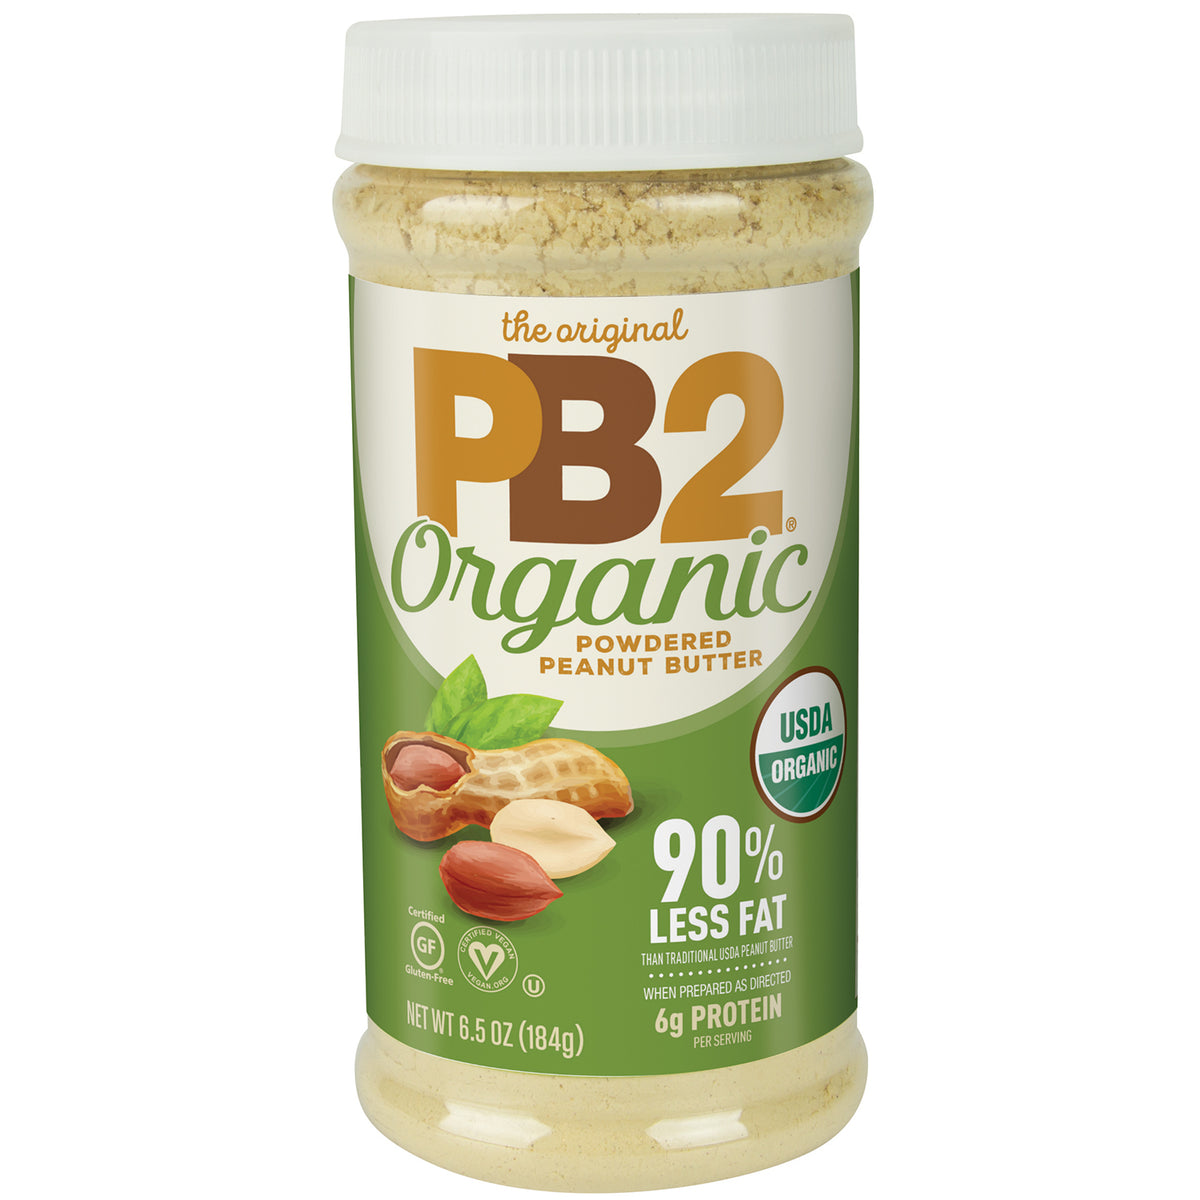 Organic Instant Roasted Peanut Butter Powder Mix